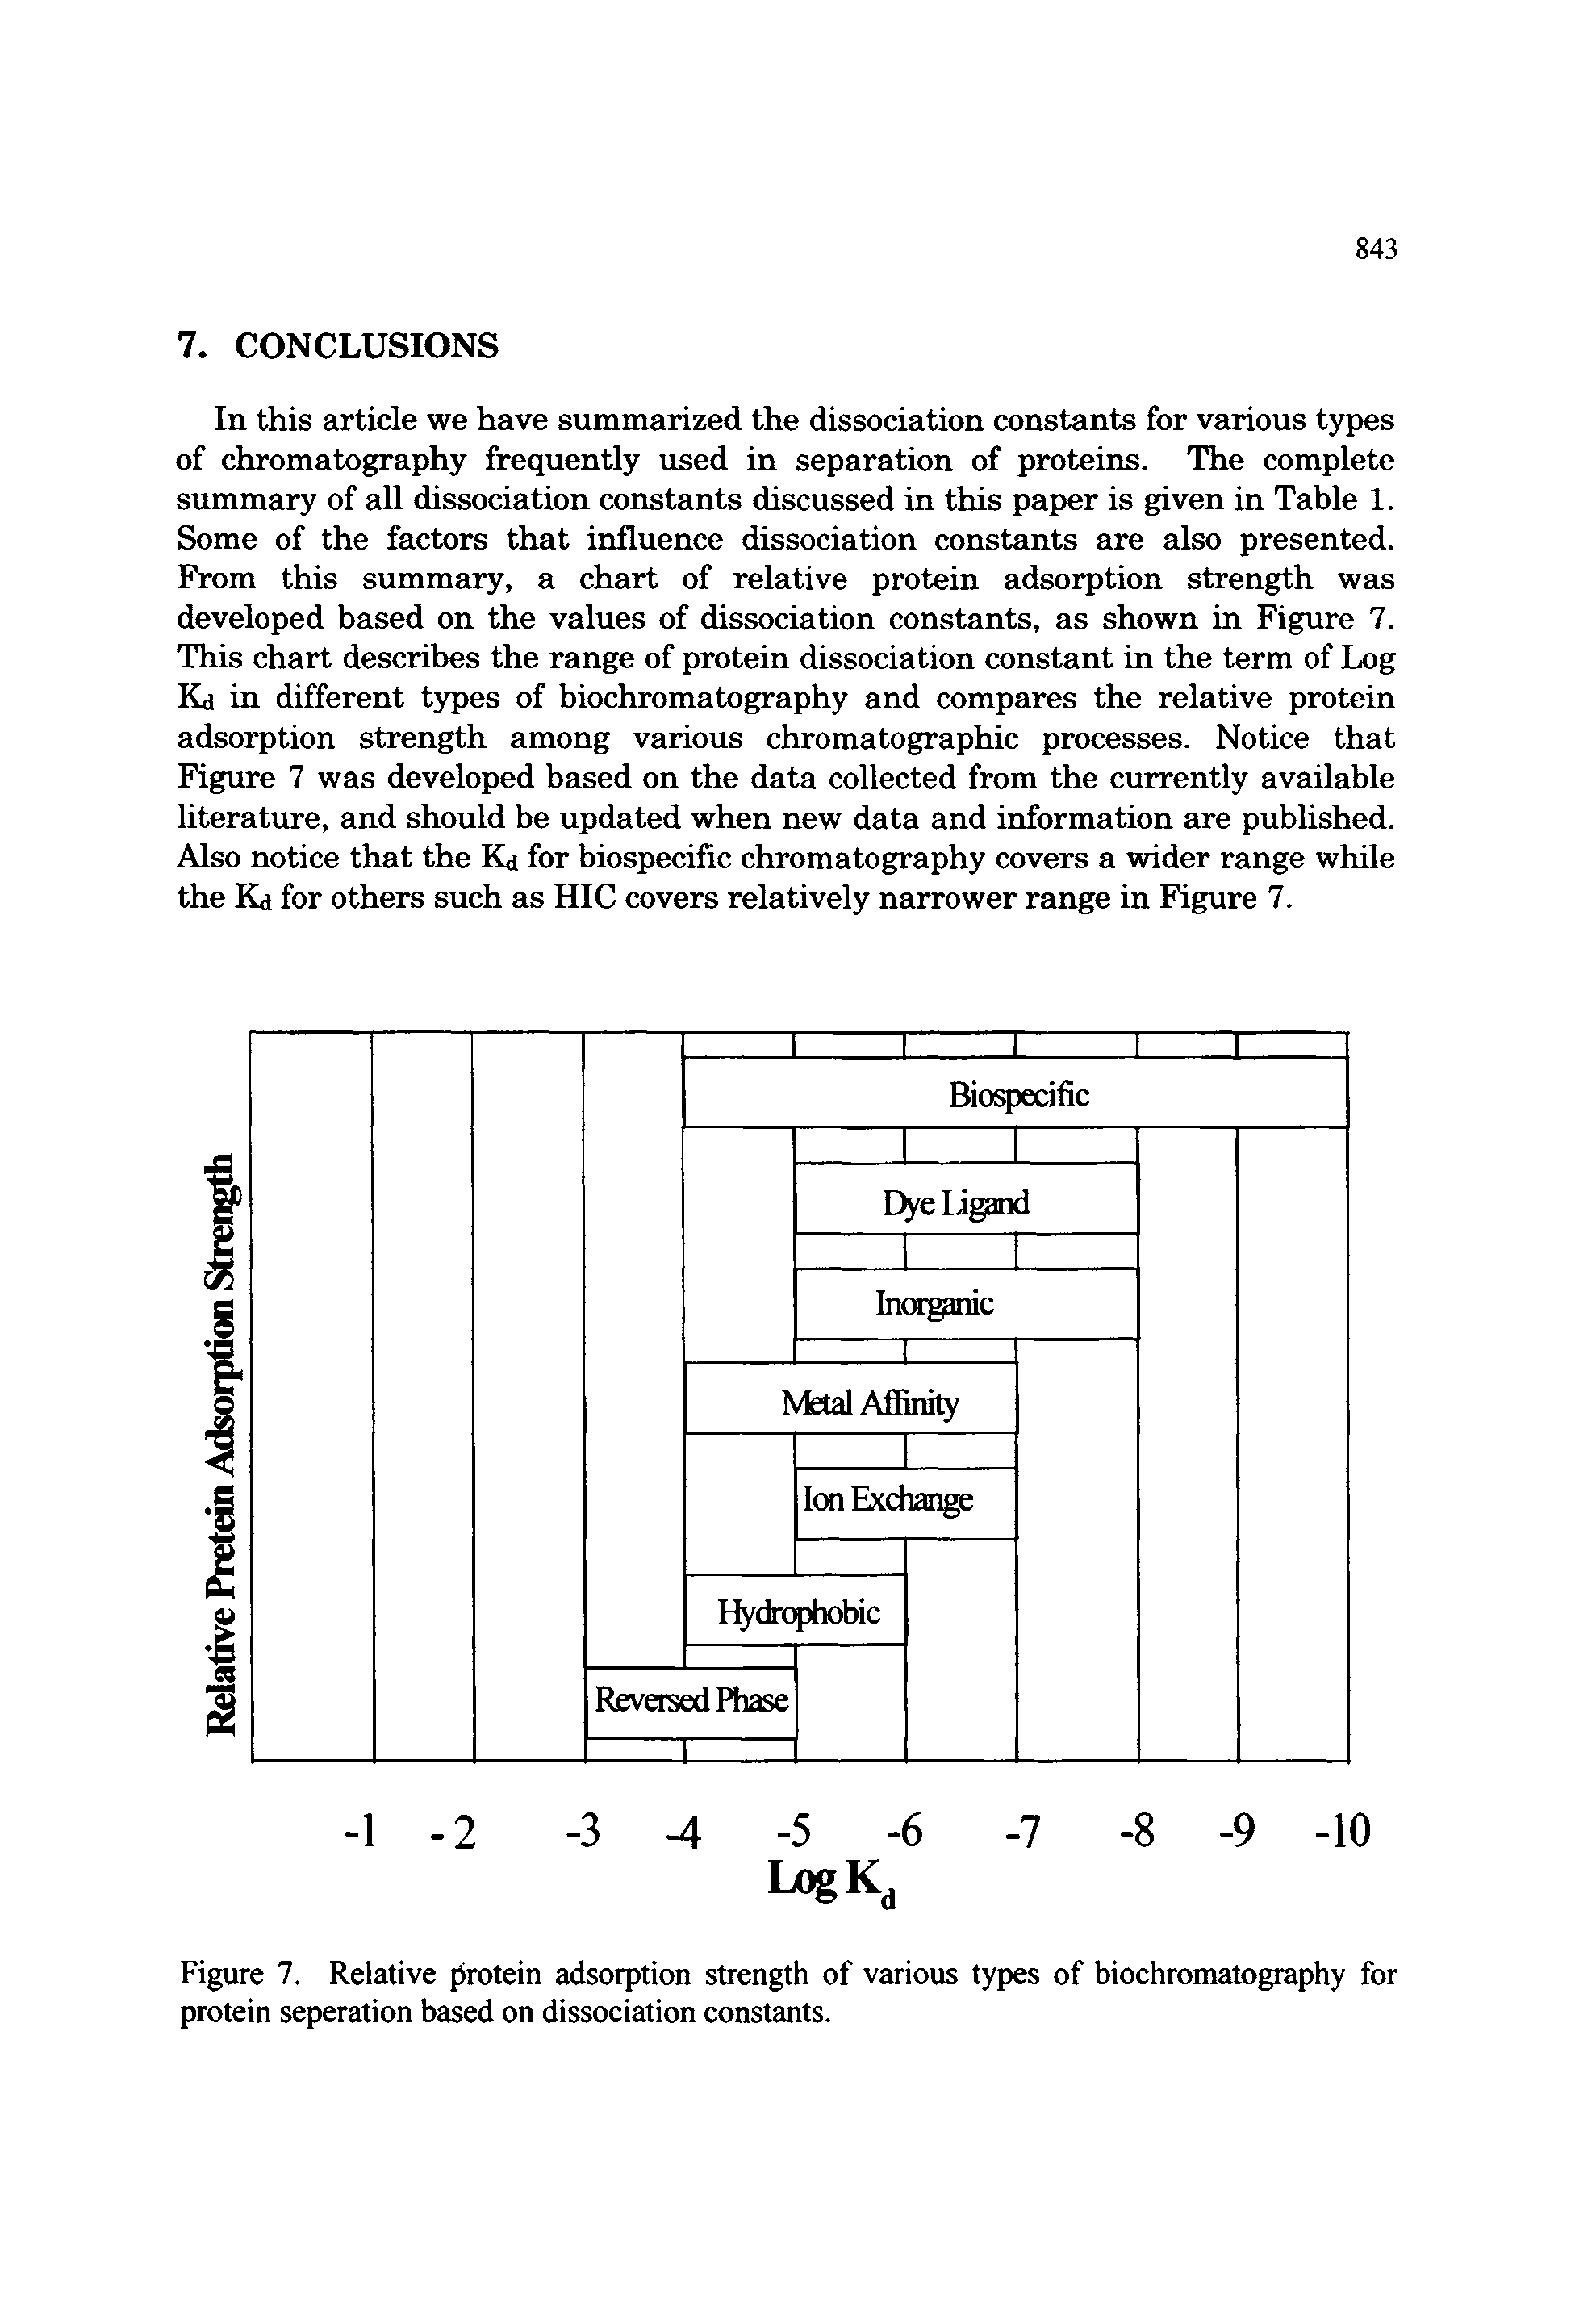 Figure 7. Relative protein adsorption strength of various types of biochromatography for protein seperation based on dissociation constants.